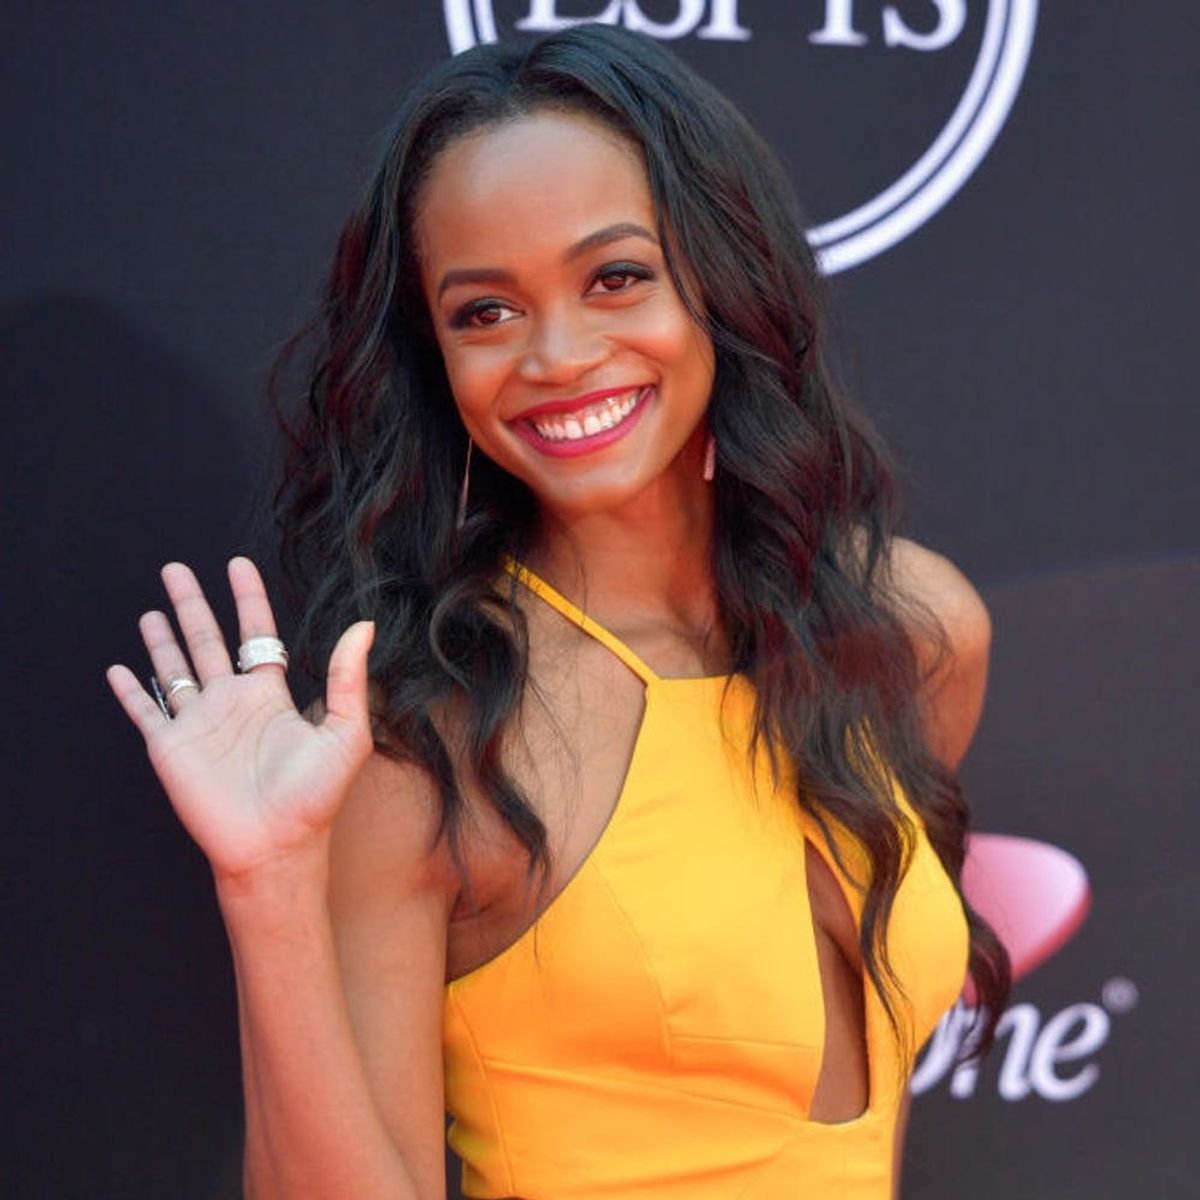 Bachelorette Rachel Lindsay Is Dropping All Sorts of Relationship Hints Leading Up to the Show’s Finale